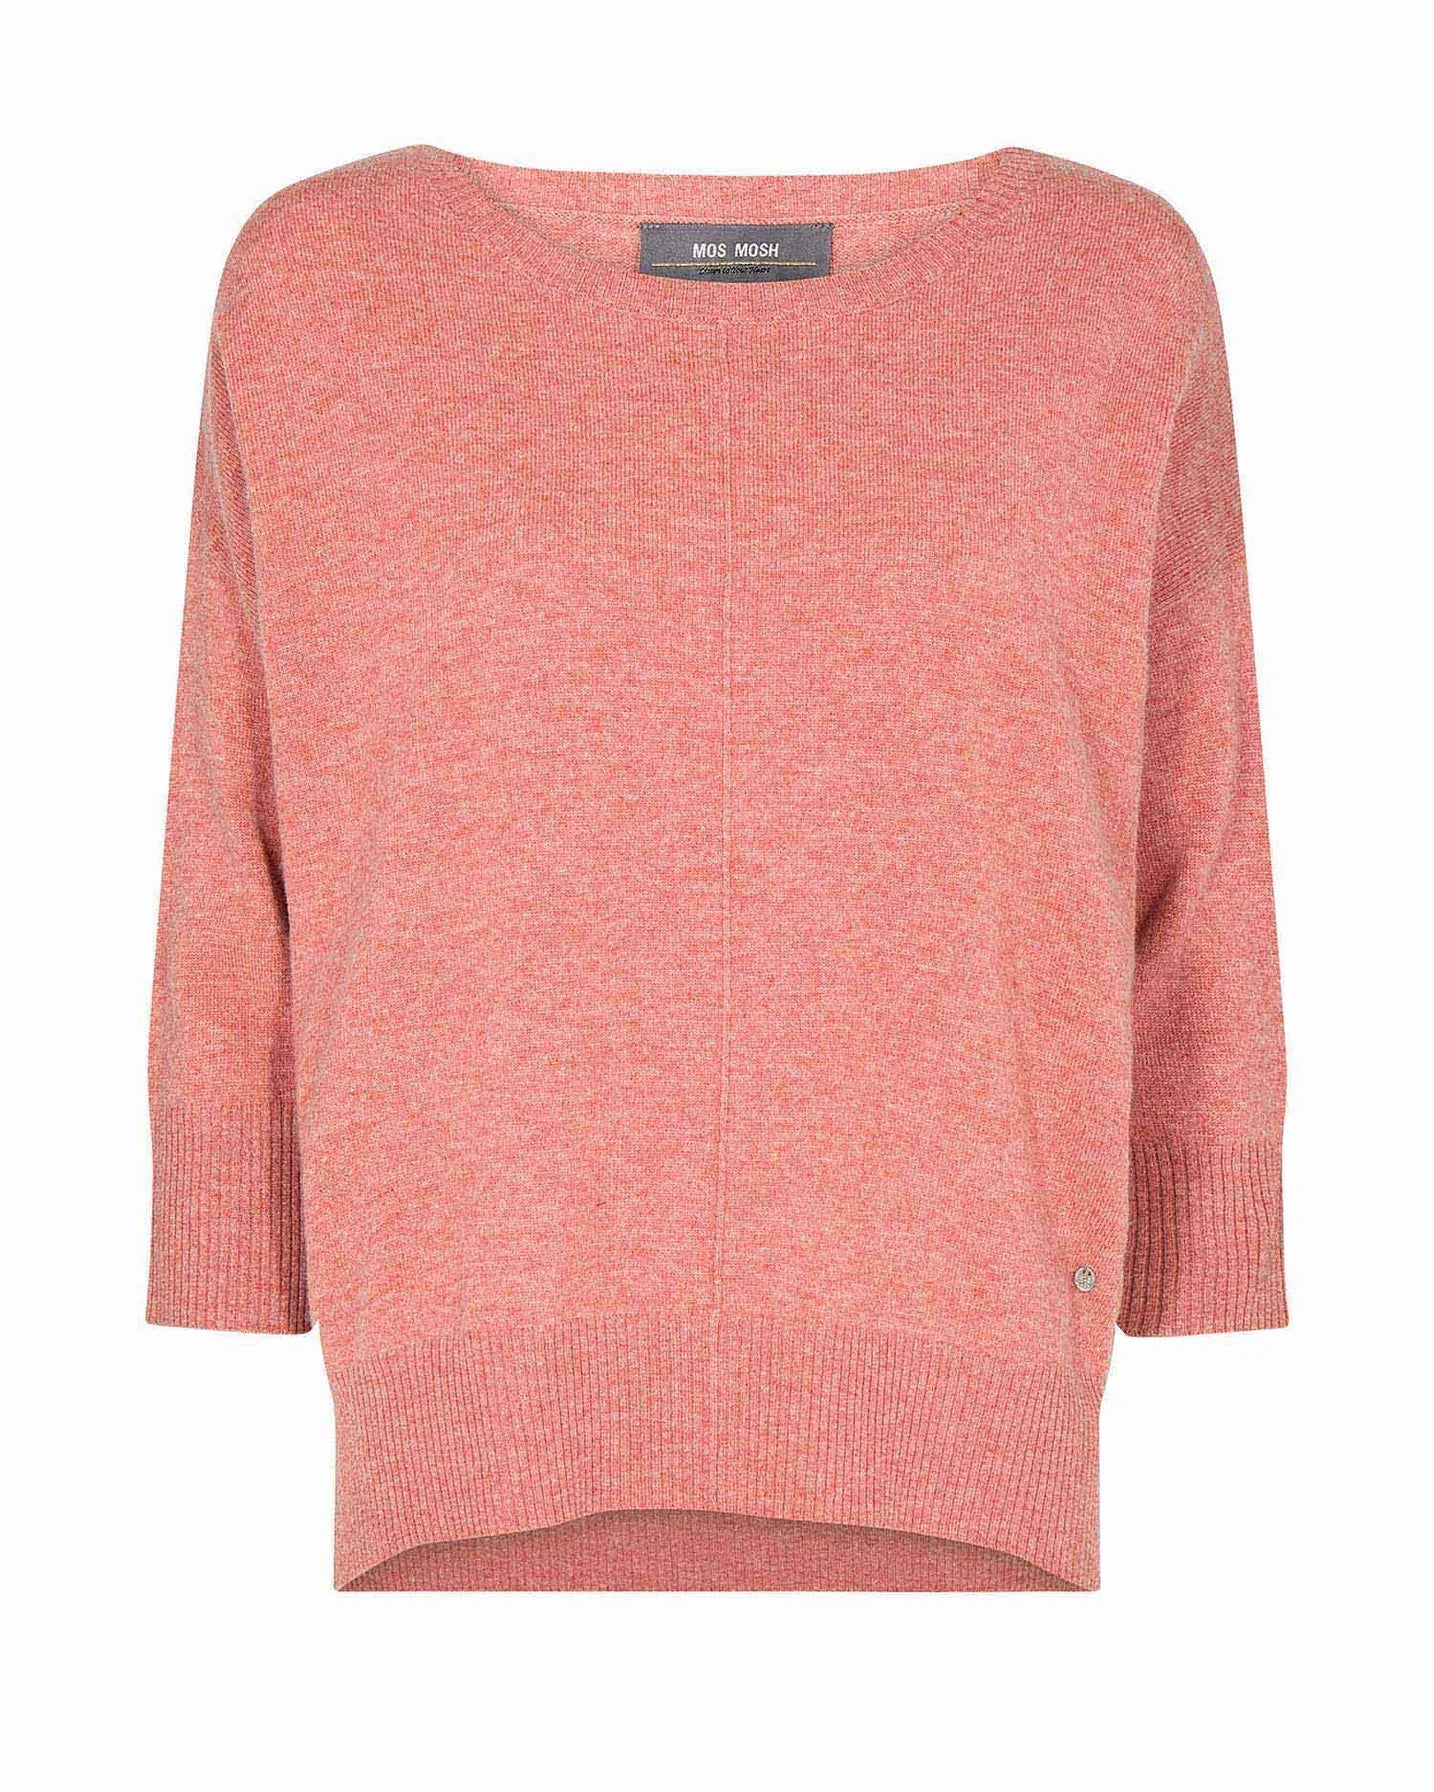 Shop Pitch 3/4 Sleeve Wool Knit | Faded Rose - Mos Mosh